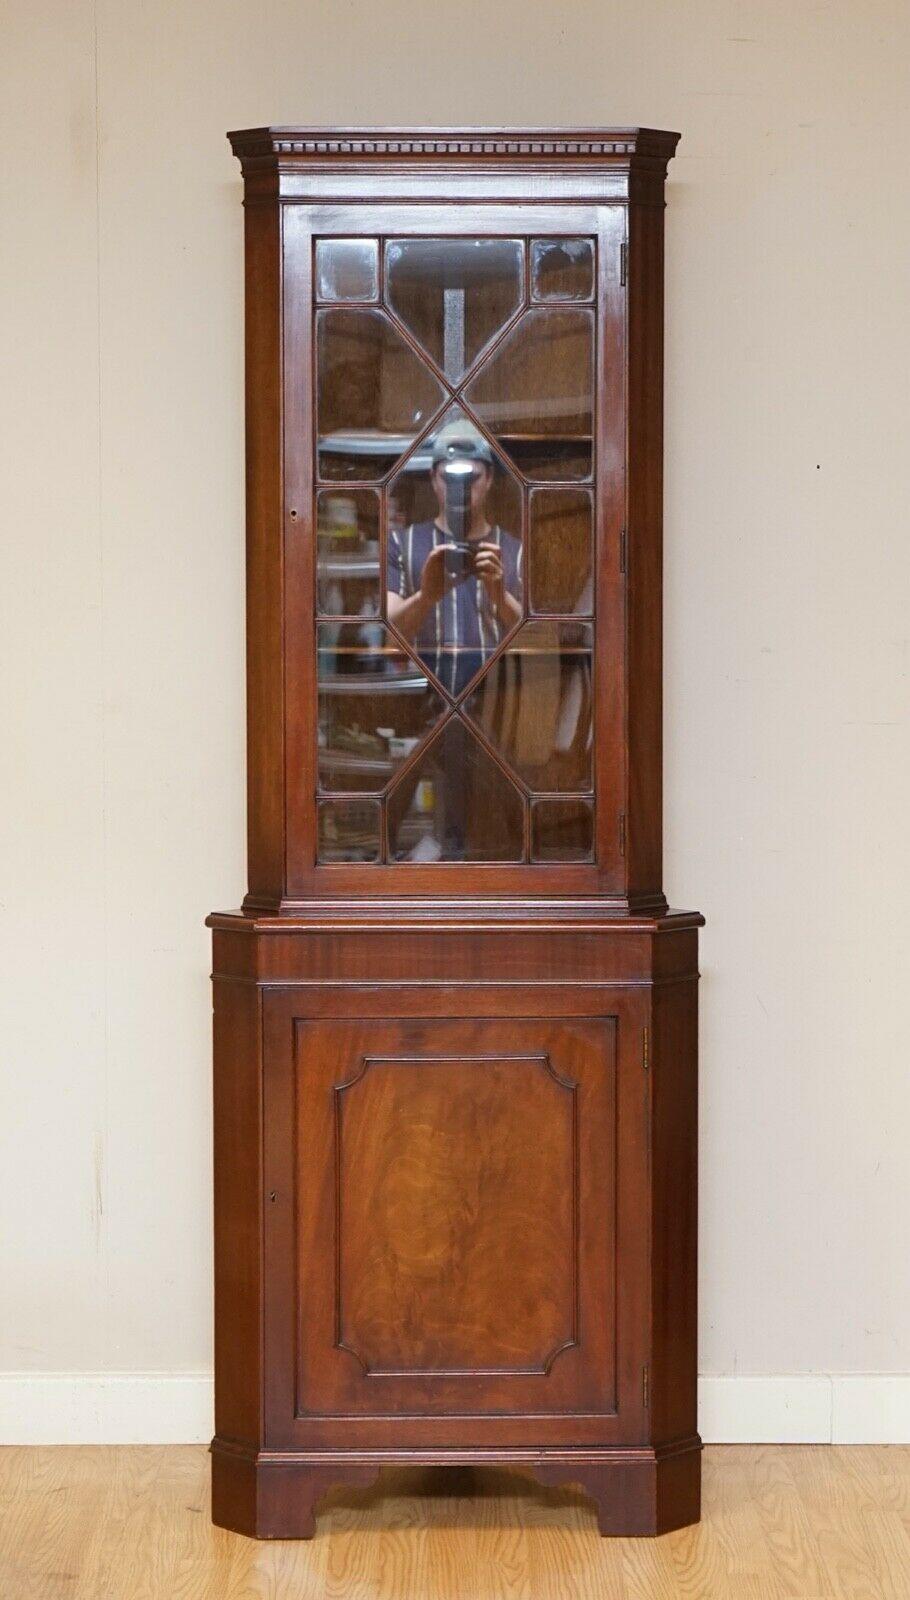 We are so excited to present to you this outstanding brown mahogany astragal glazed corner cabinet.

It has a key to lock the doors, a very well made piece.

We have lightly restored this by giving it a hand clean all over, hand waxed and hand